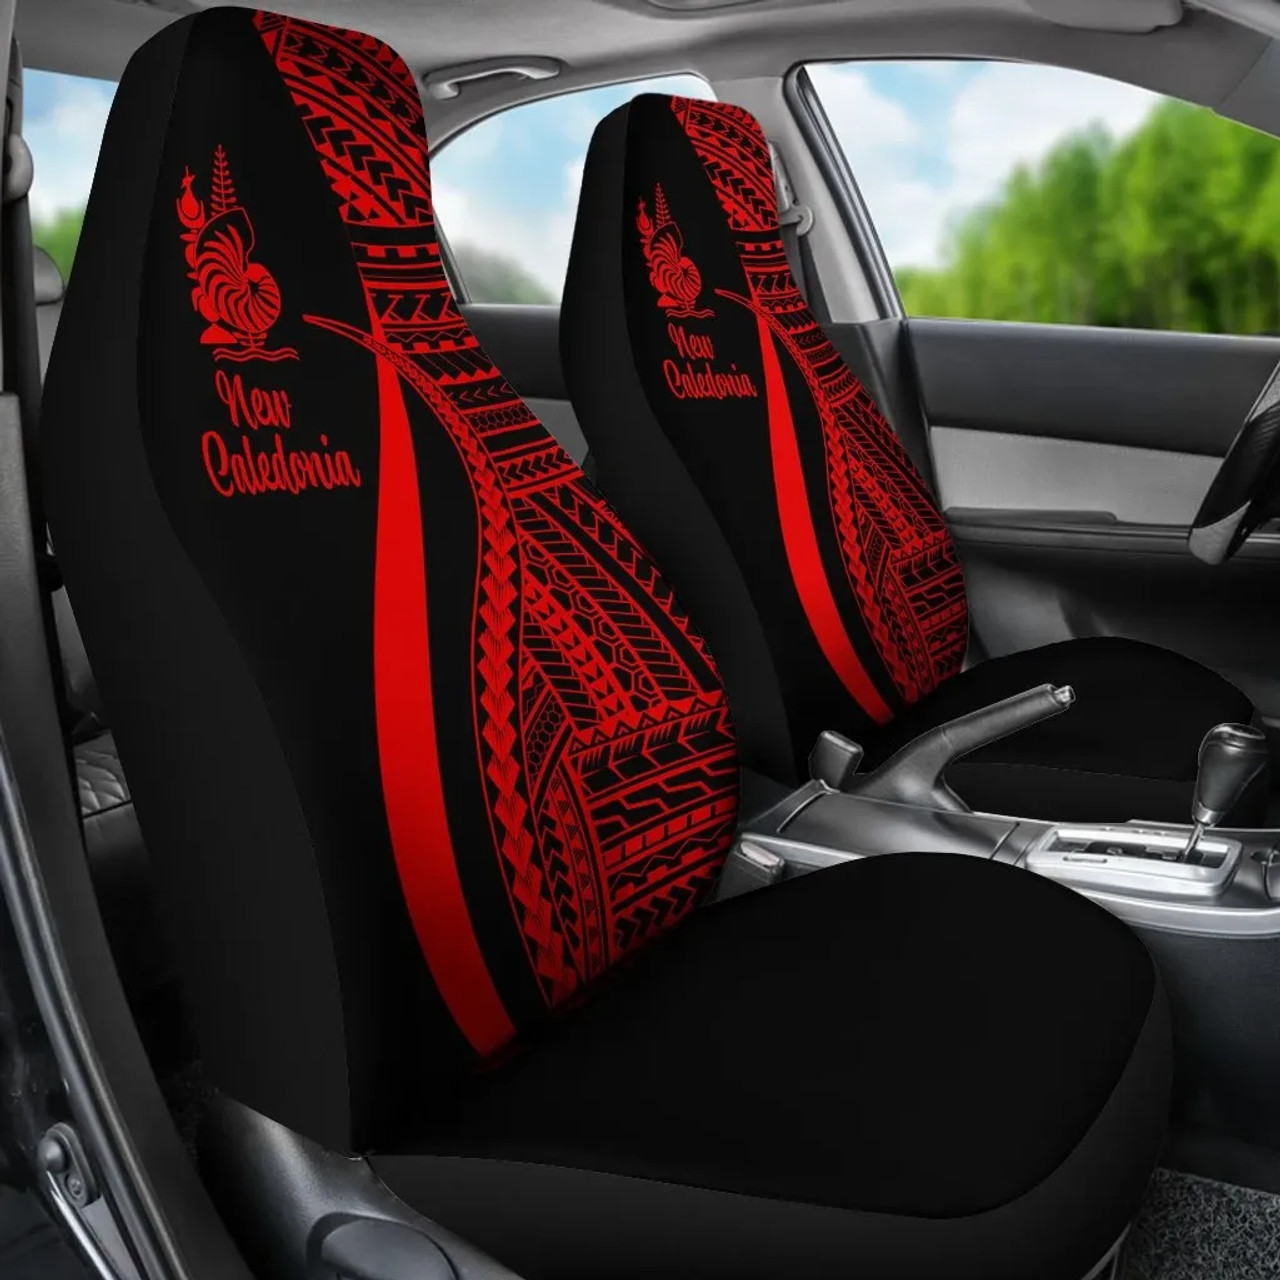 New Caledonia Car Seat Covers - Red Polynesian Tentacle Tribal Pattern Crest